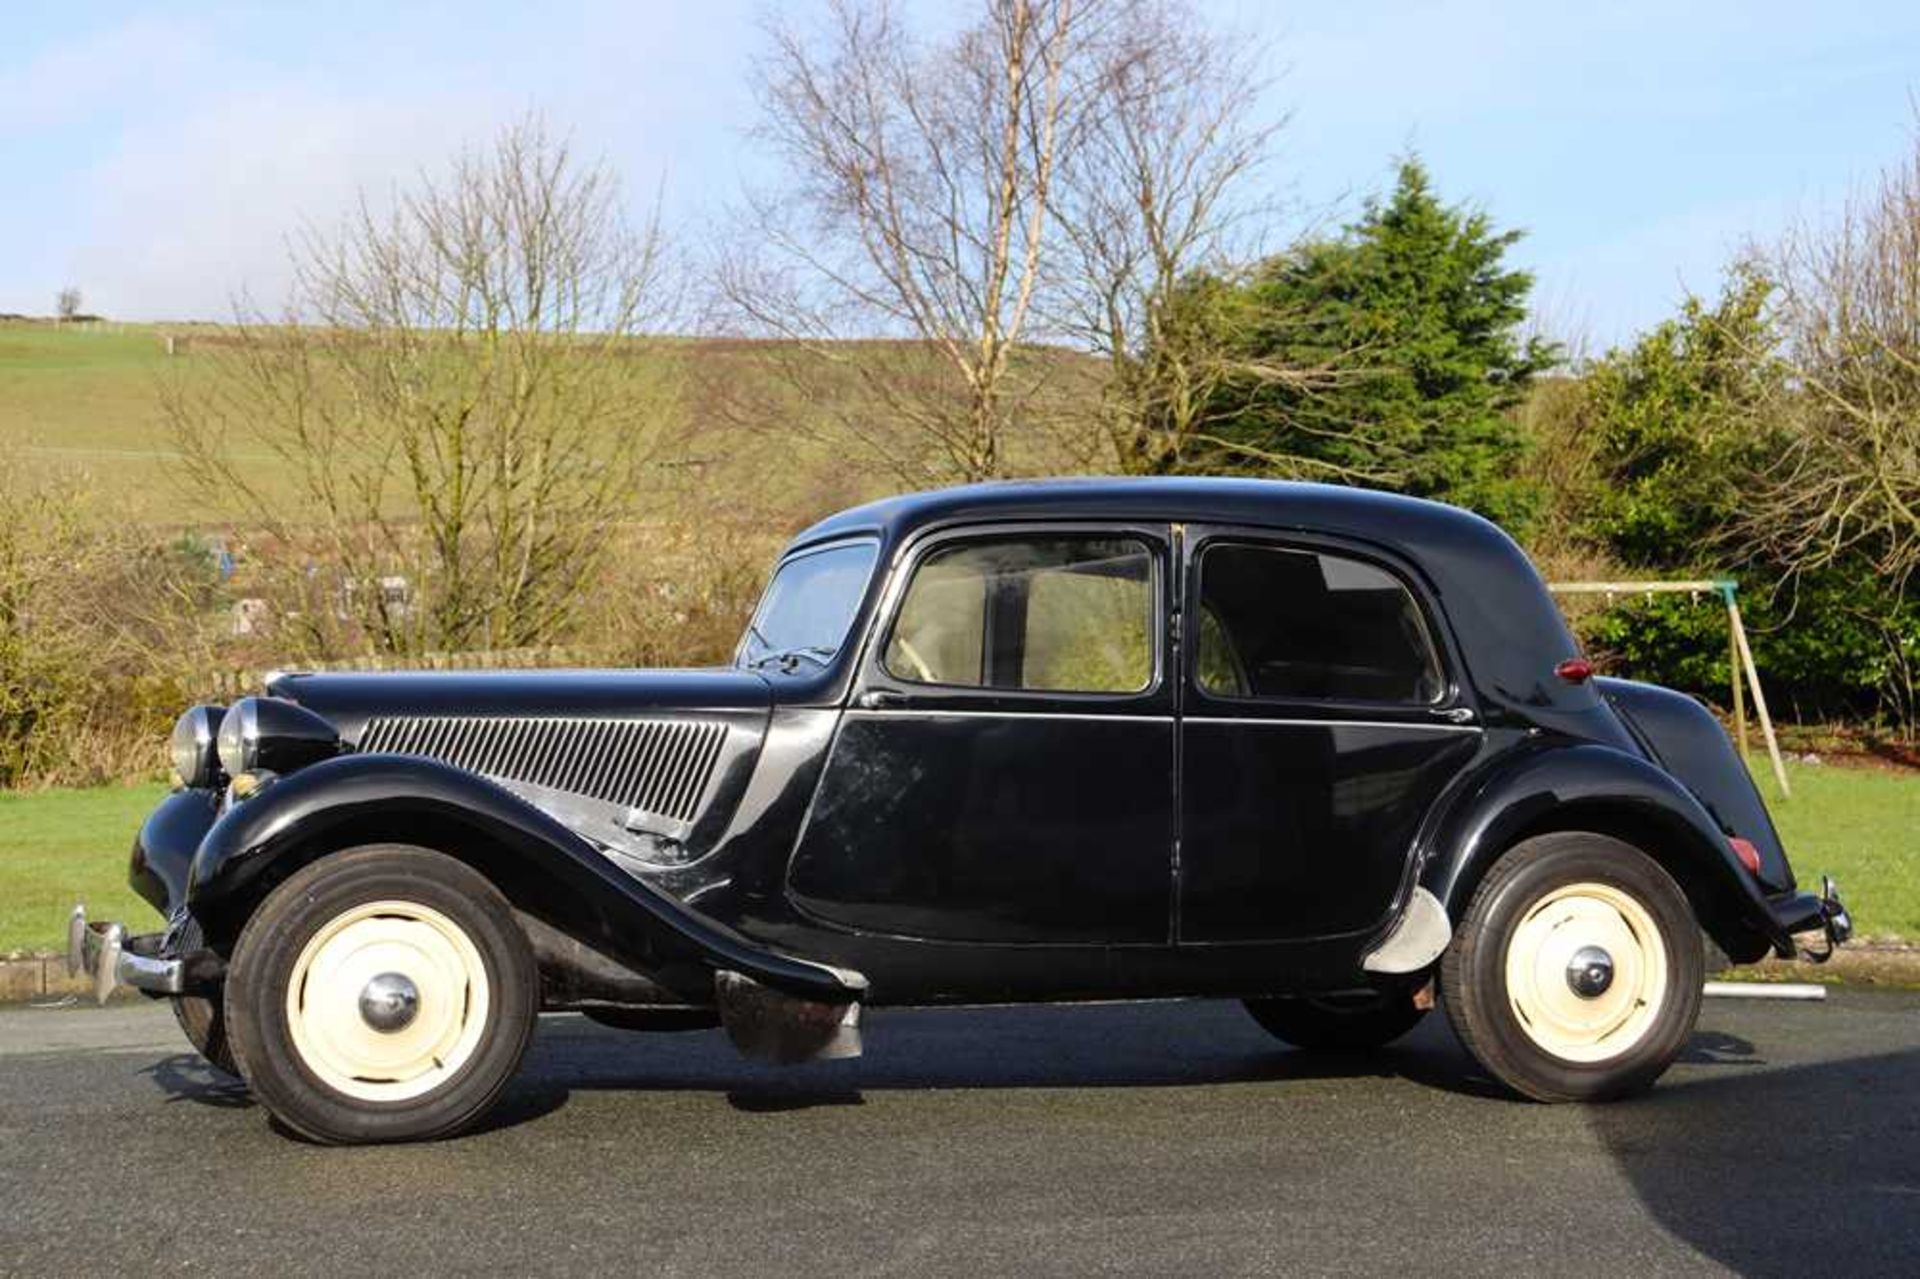 1952 Citroën 11BL Traction Avant In current ownership for over 40 years - Image 5 of 60